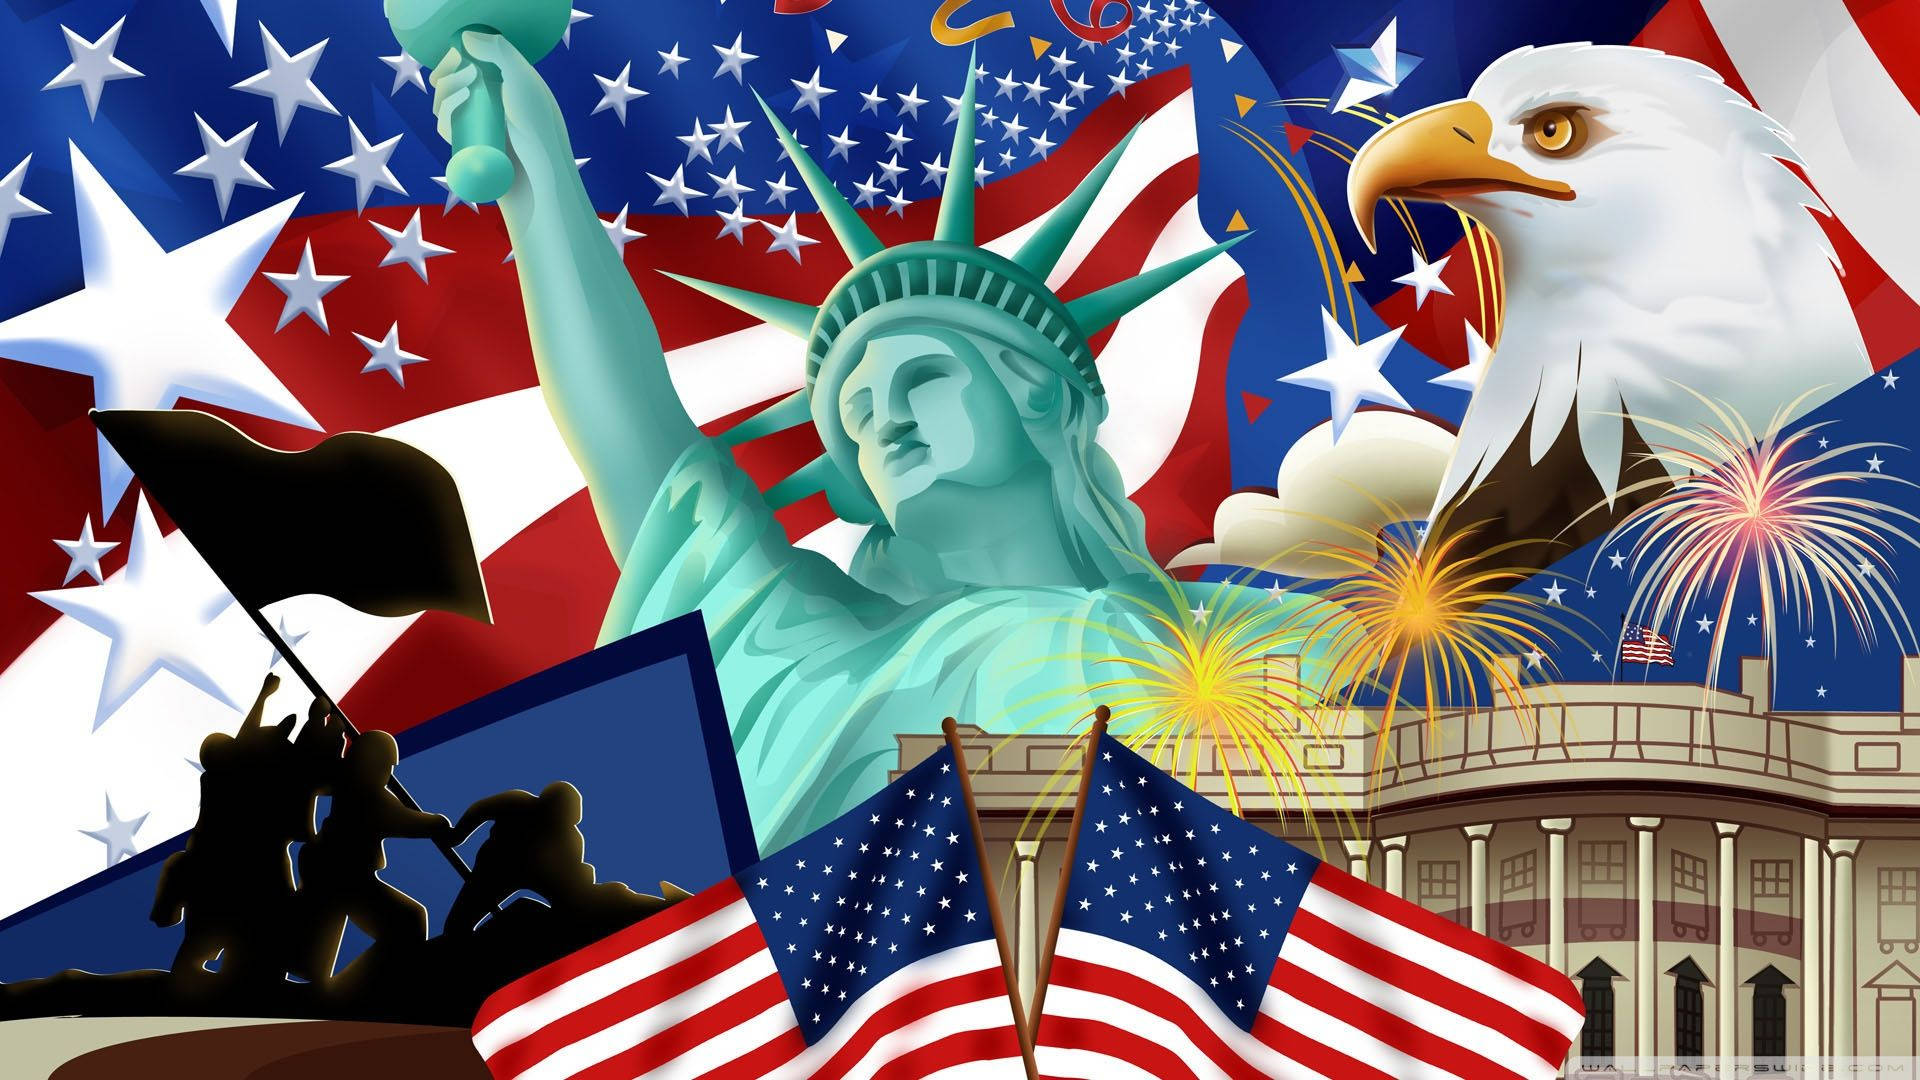 Celebrate America's Independence Day in Style Wallpaper